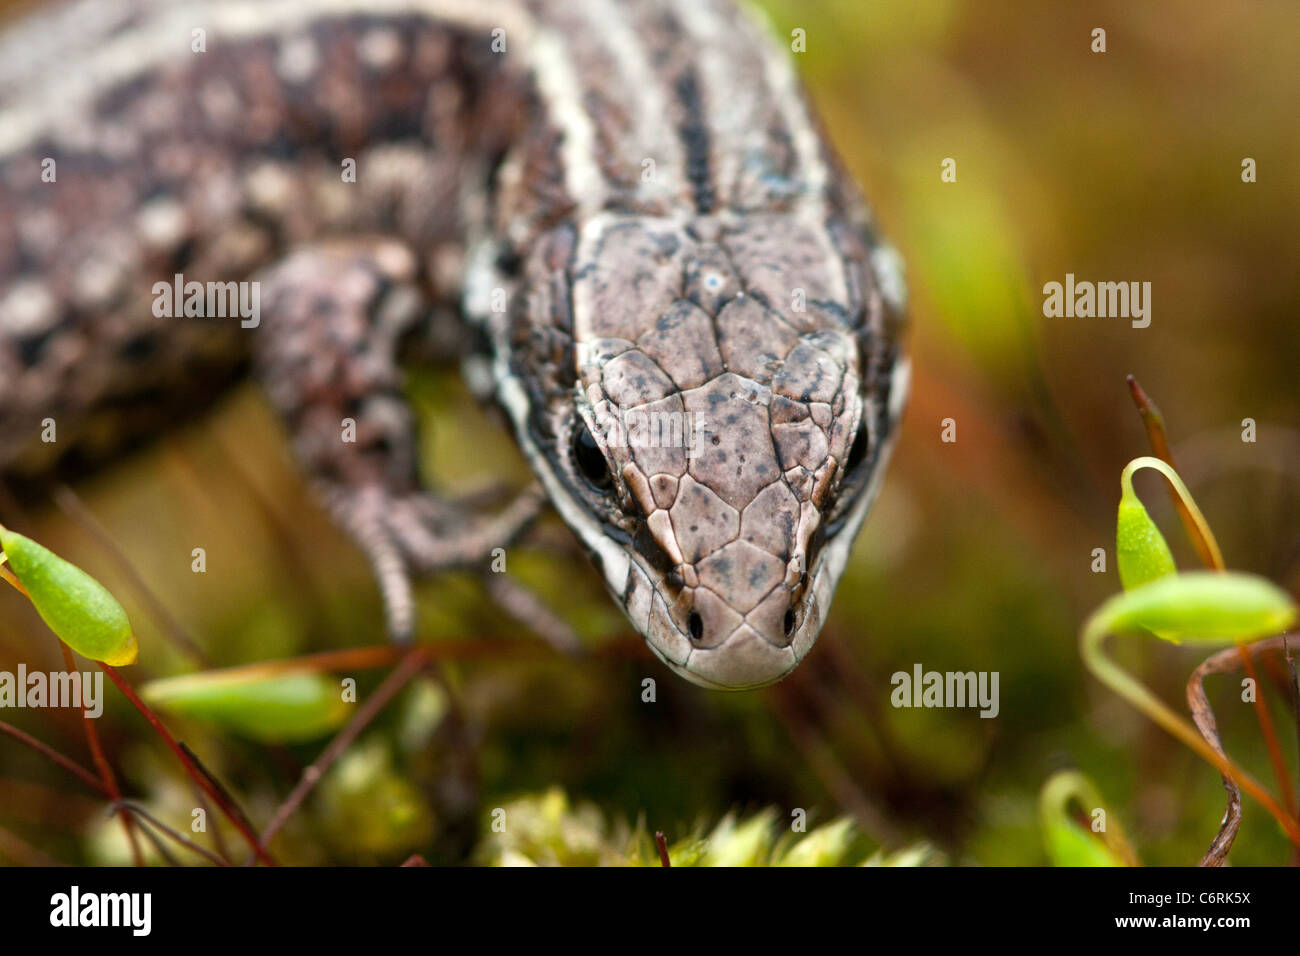 A head on image of a Common Lizard walking through moss. Stock Photo